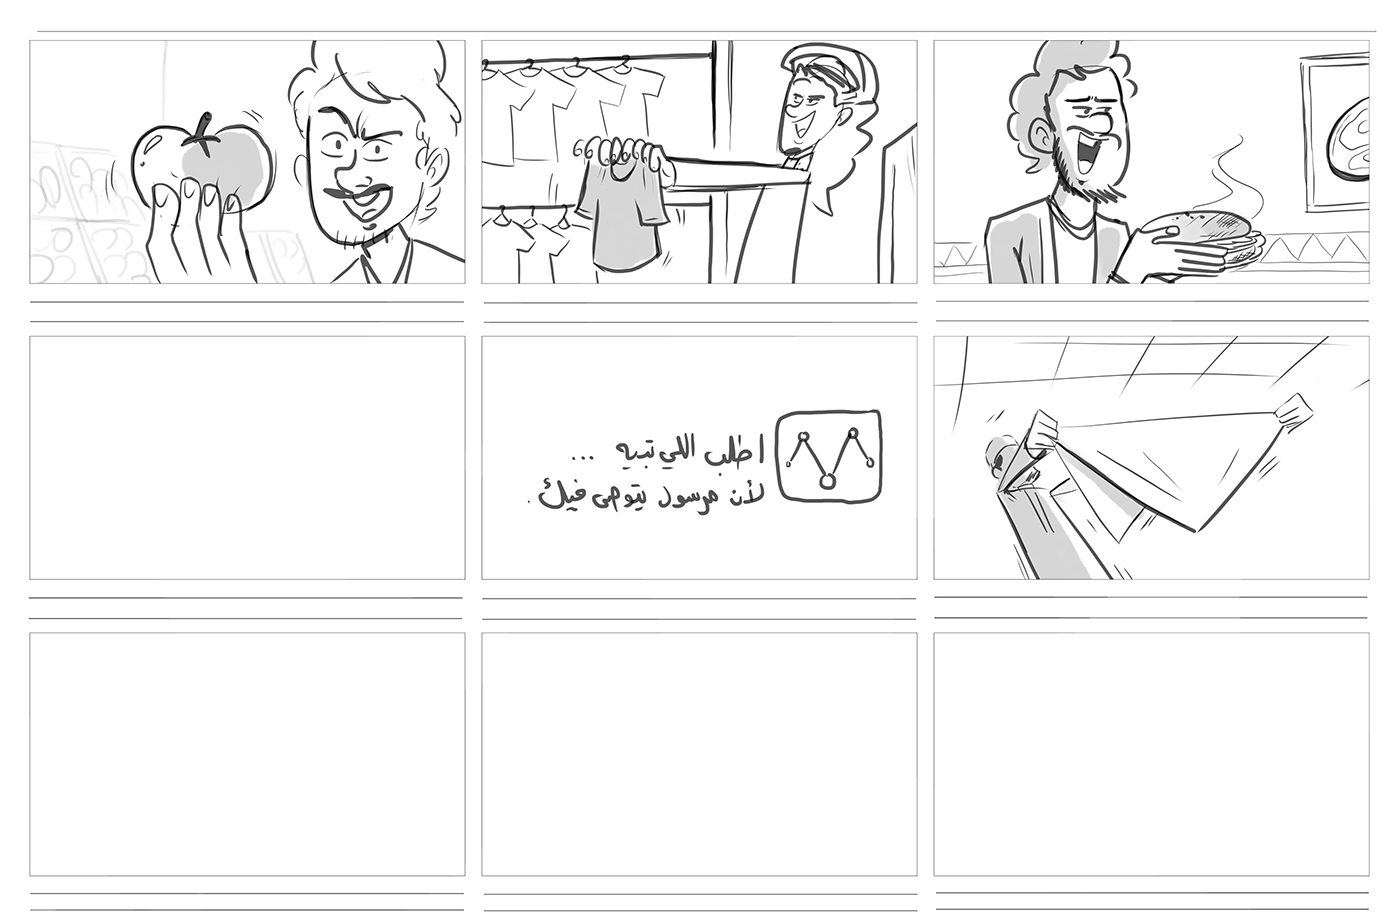 commercial concepts drawings ideas ideation mrsool pitch Saudi sketch Storyboards